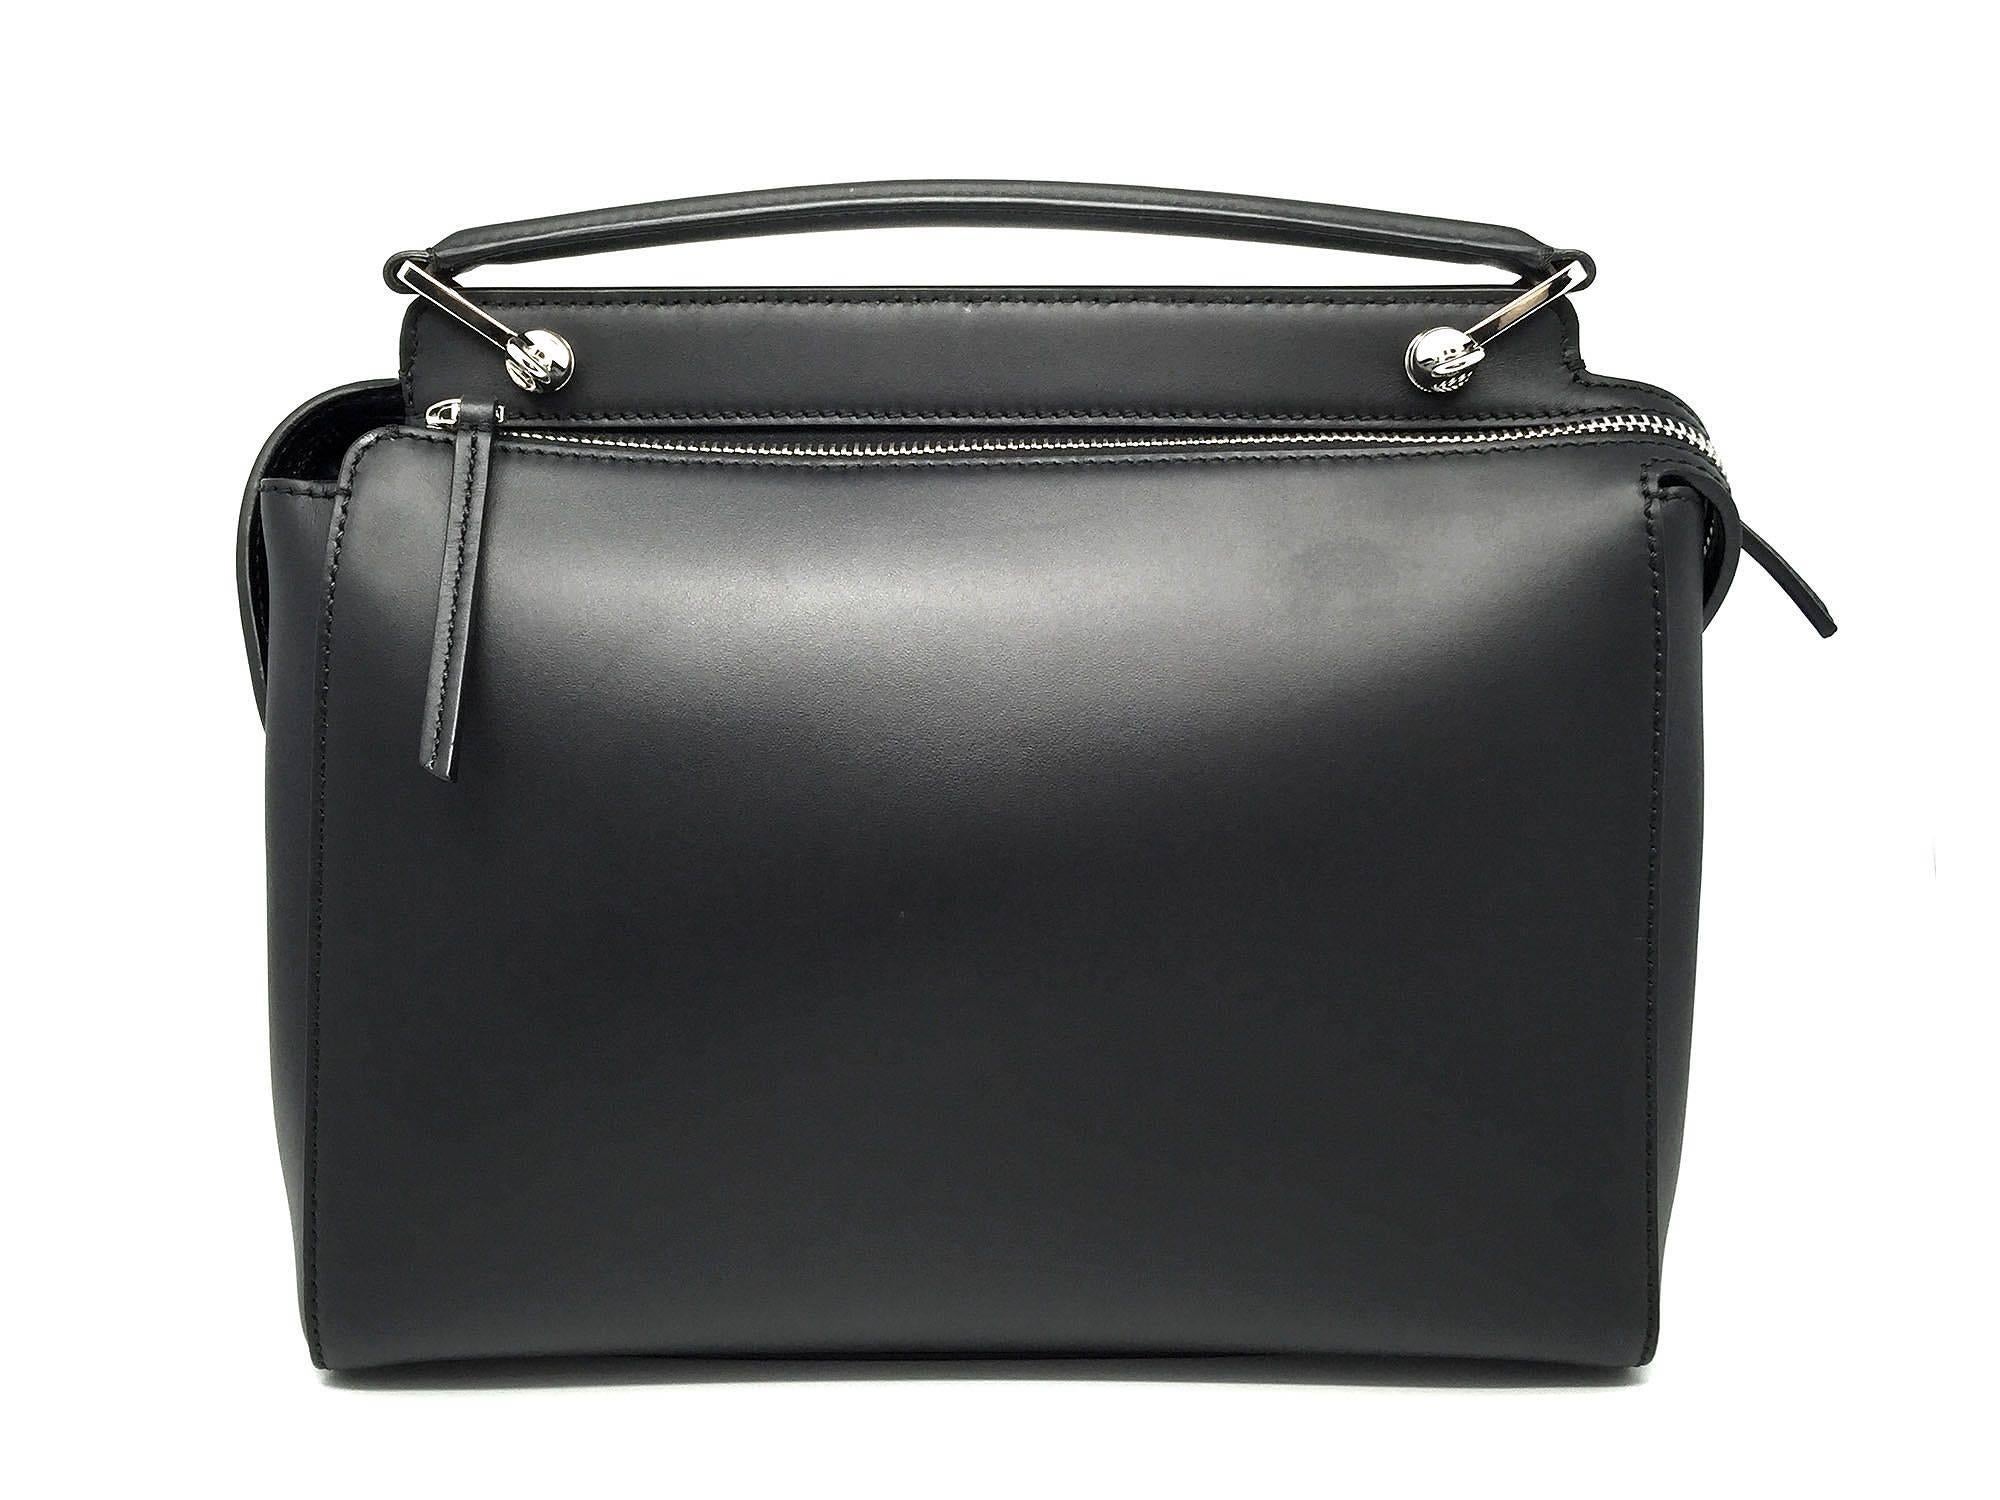 Fendi Dotcom Black Calfskin Leather Satchel Bag In New Condition For Sale In Kowloon, HK